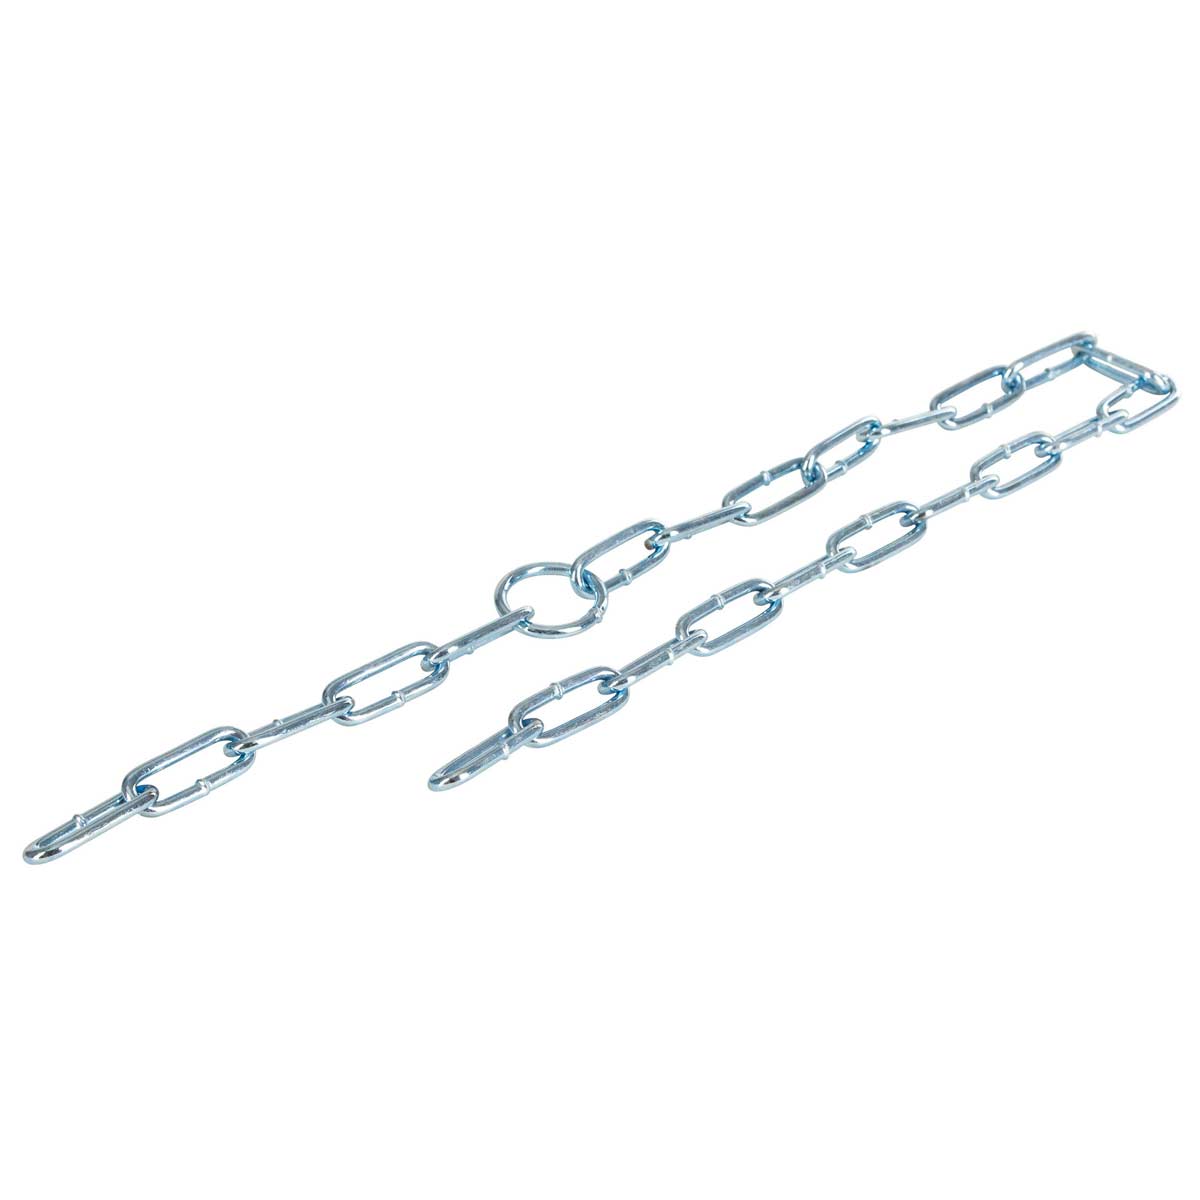 Hanging chain75 cm for pig toy 4 mm galvanized